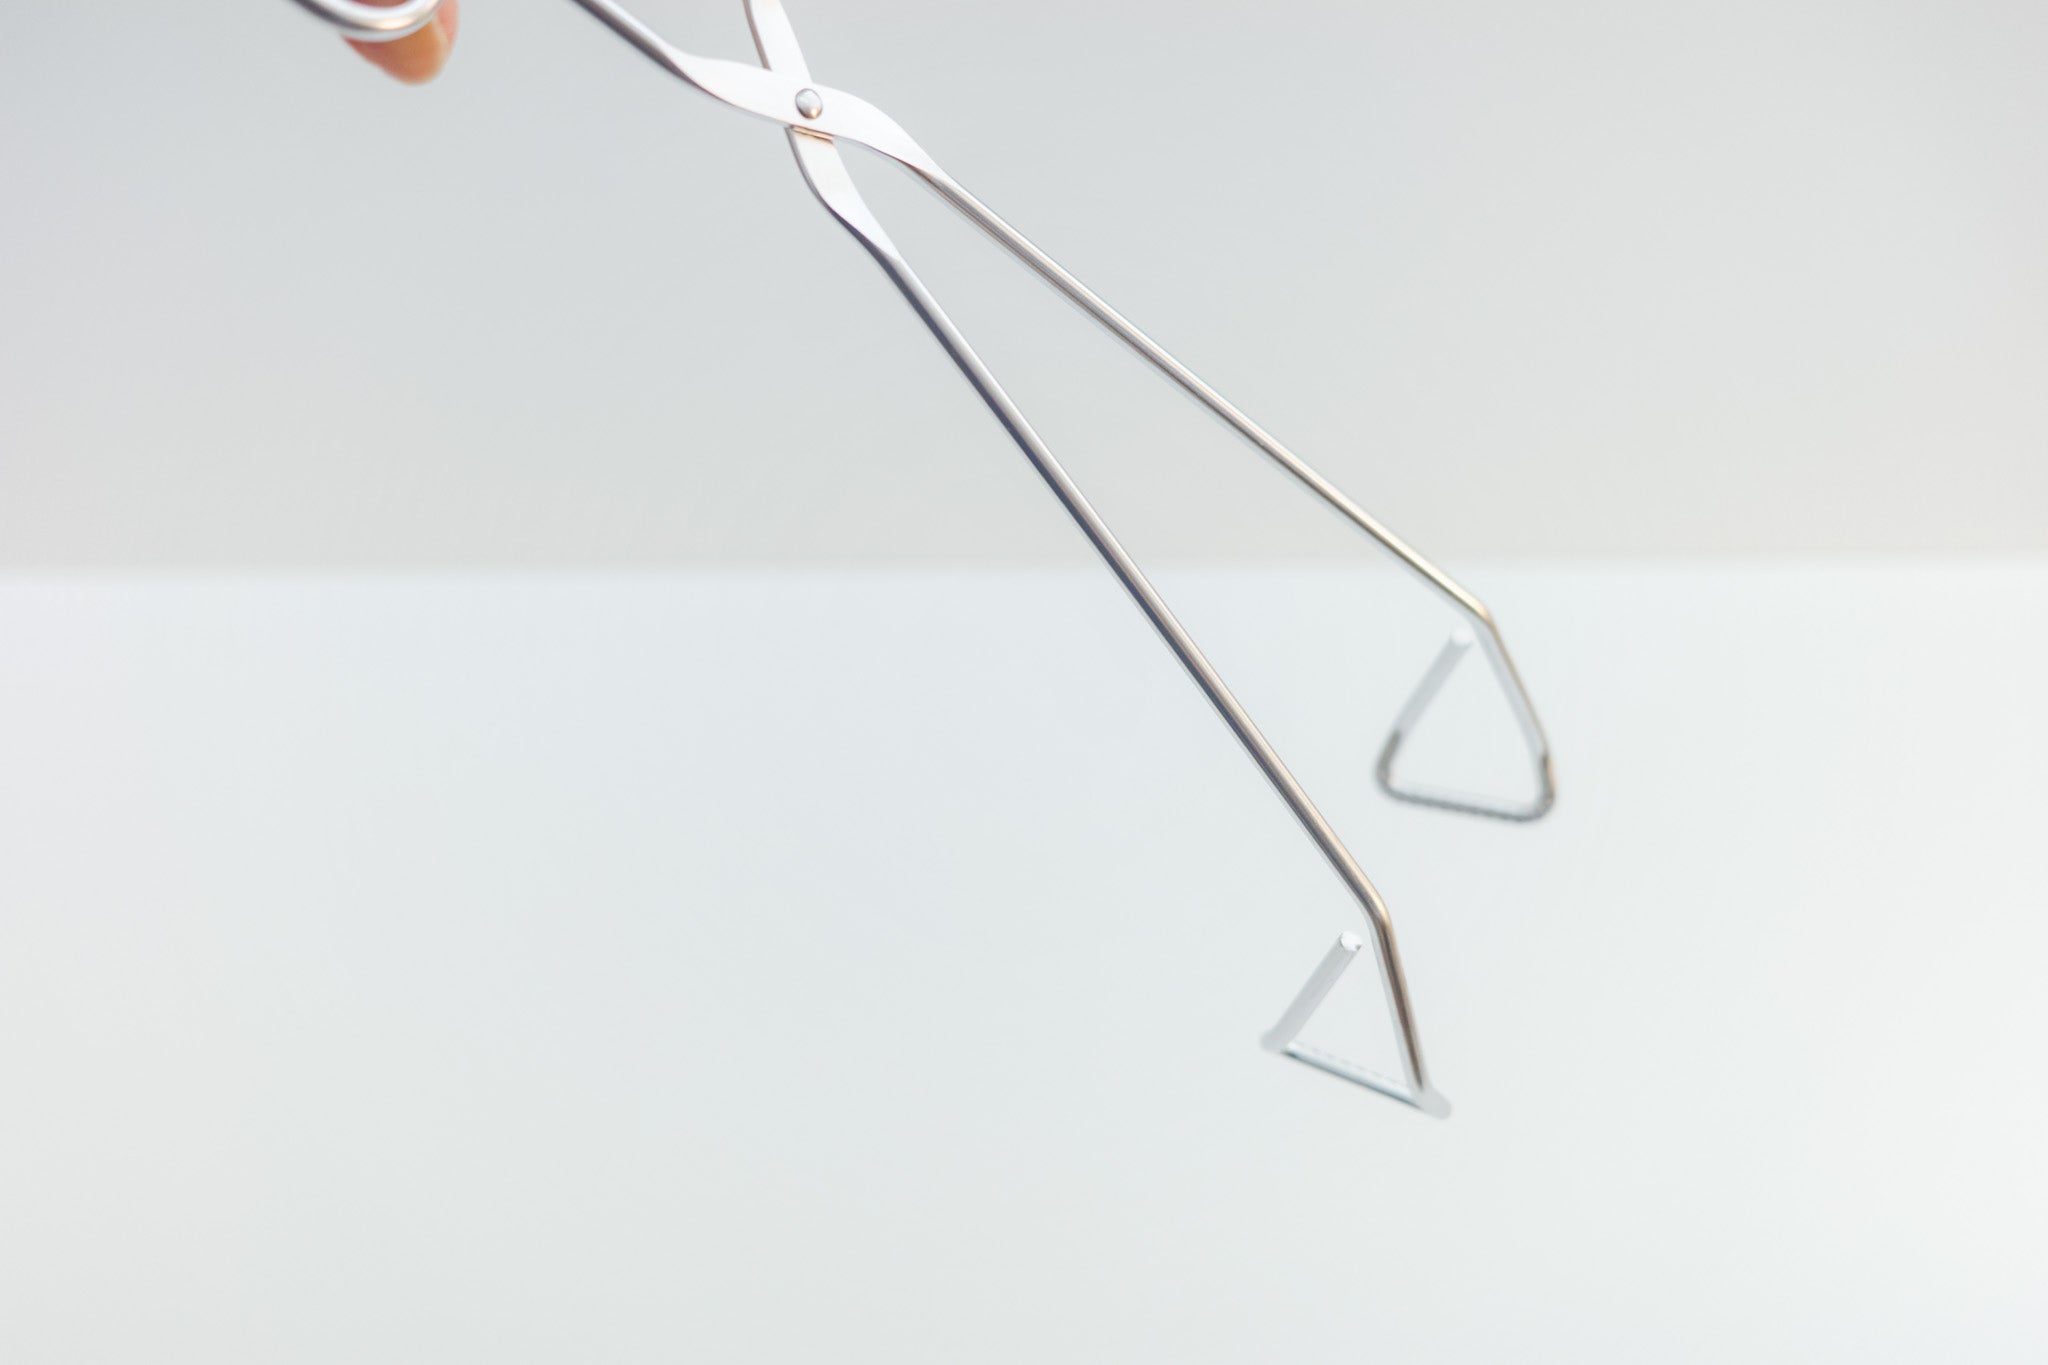 Stainless Kitchen Tongs